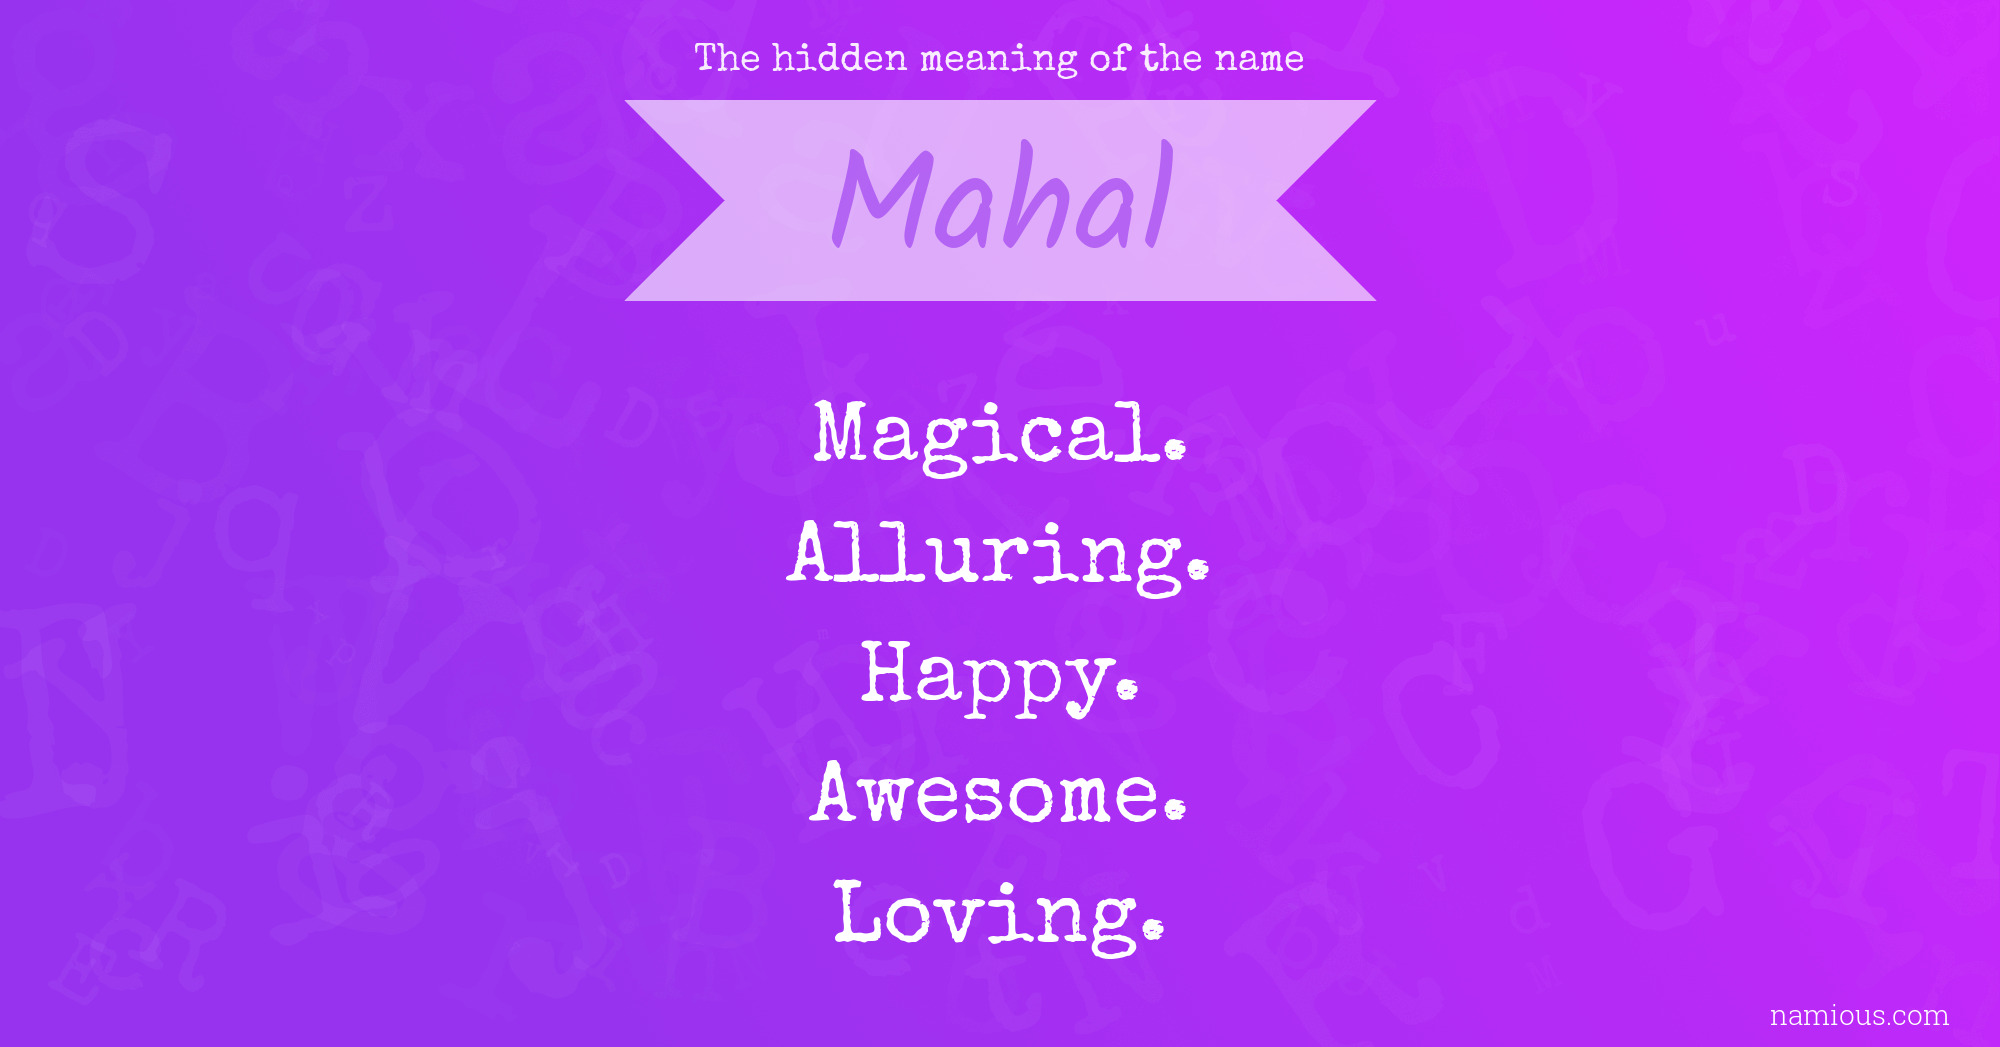 The hidden meaning of the name Mahal